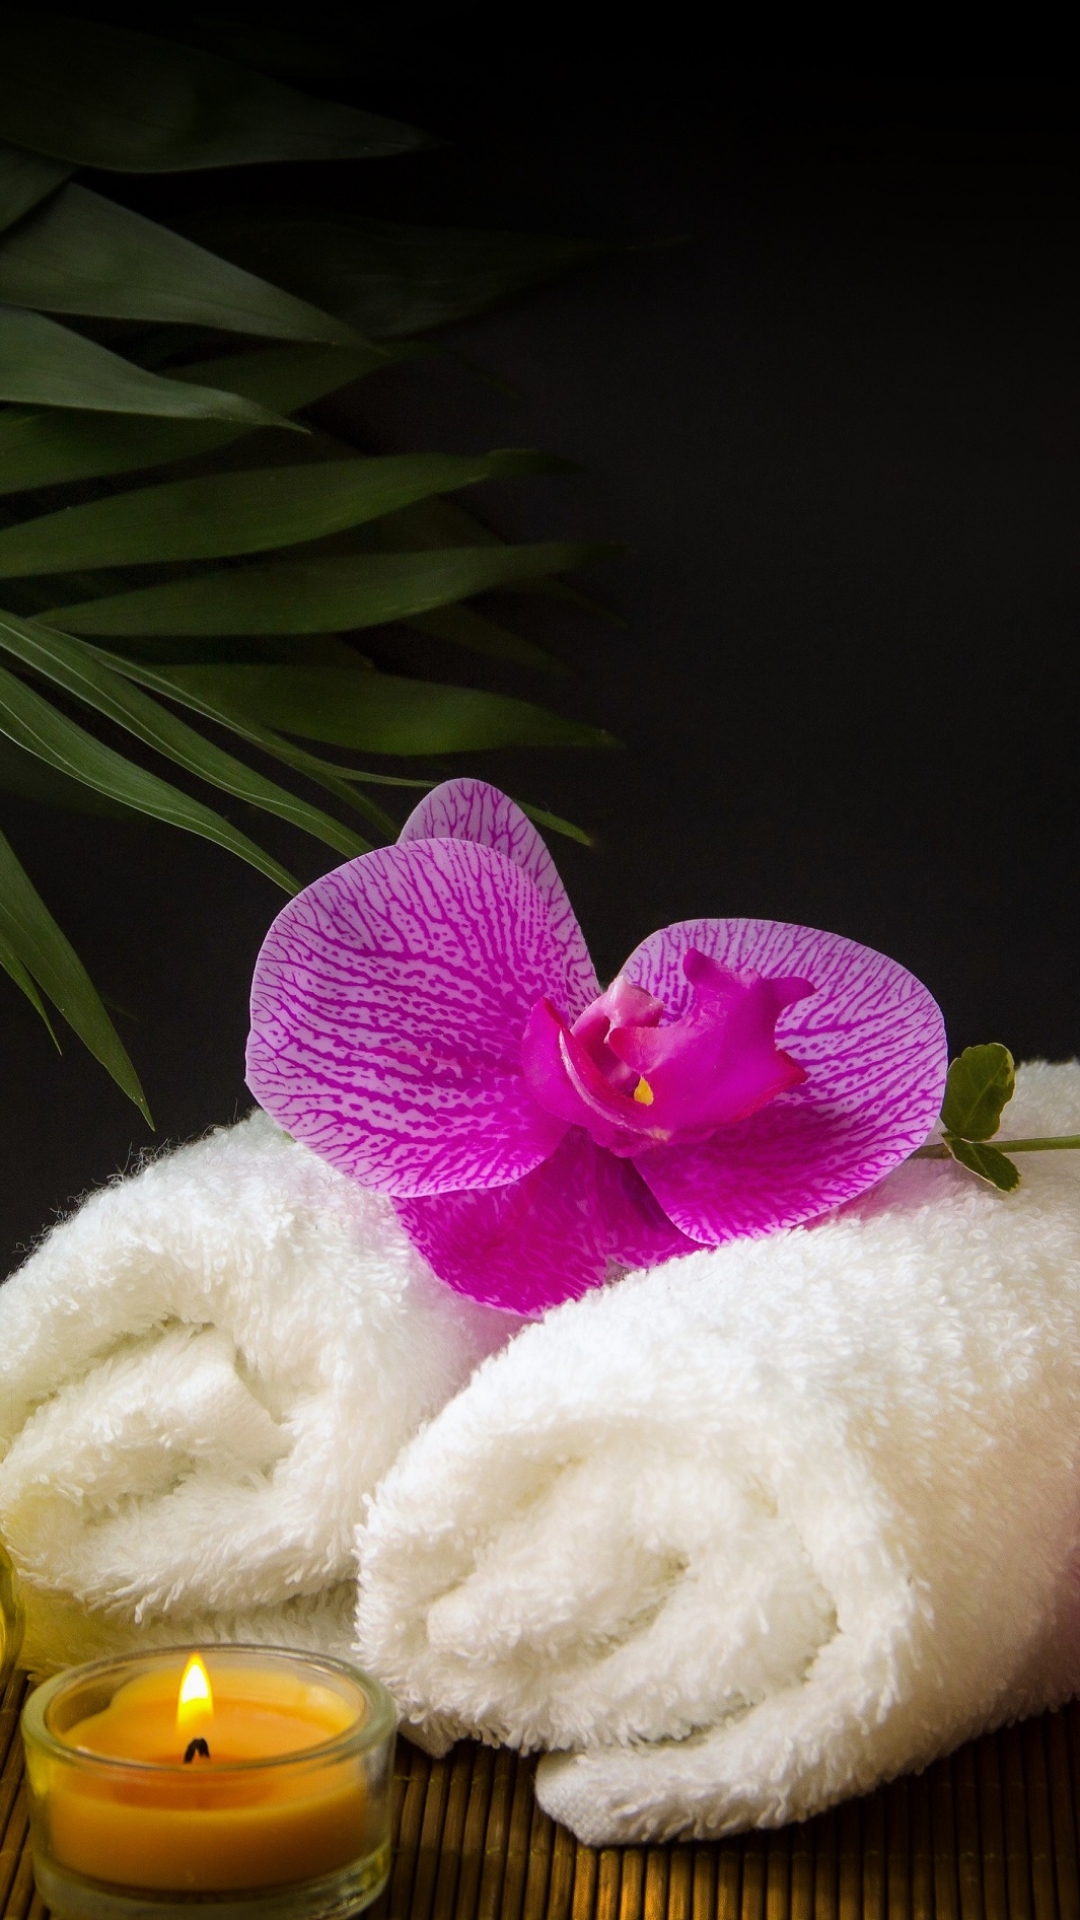 Free HD spa, man made, candle, towel, orchid, still life